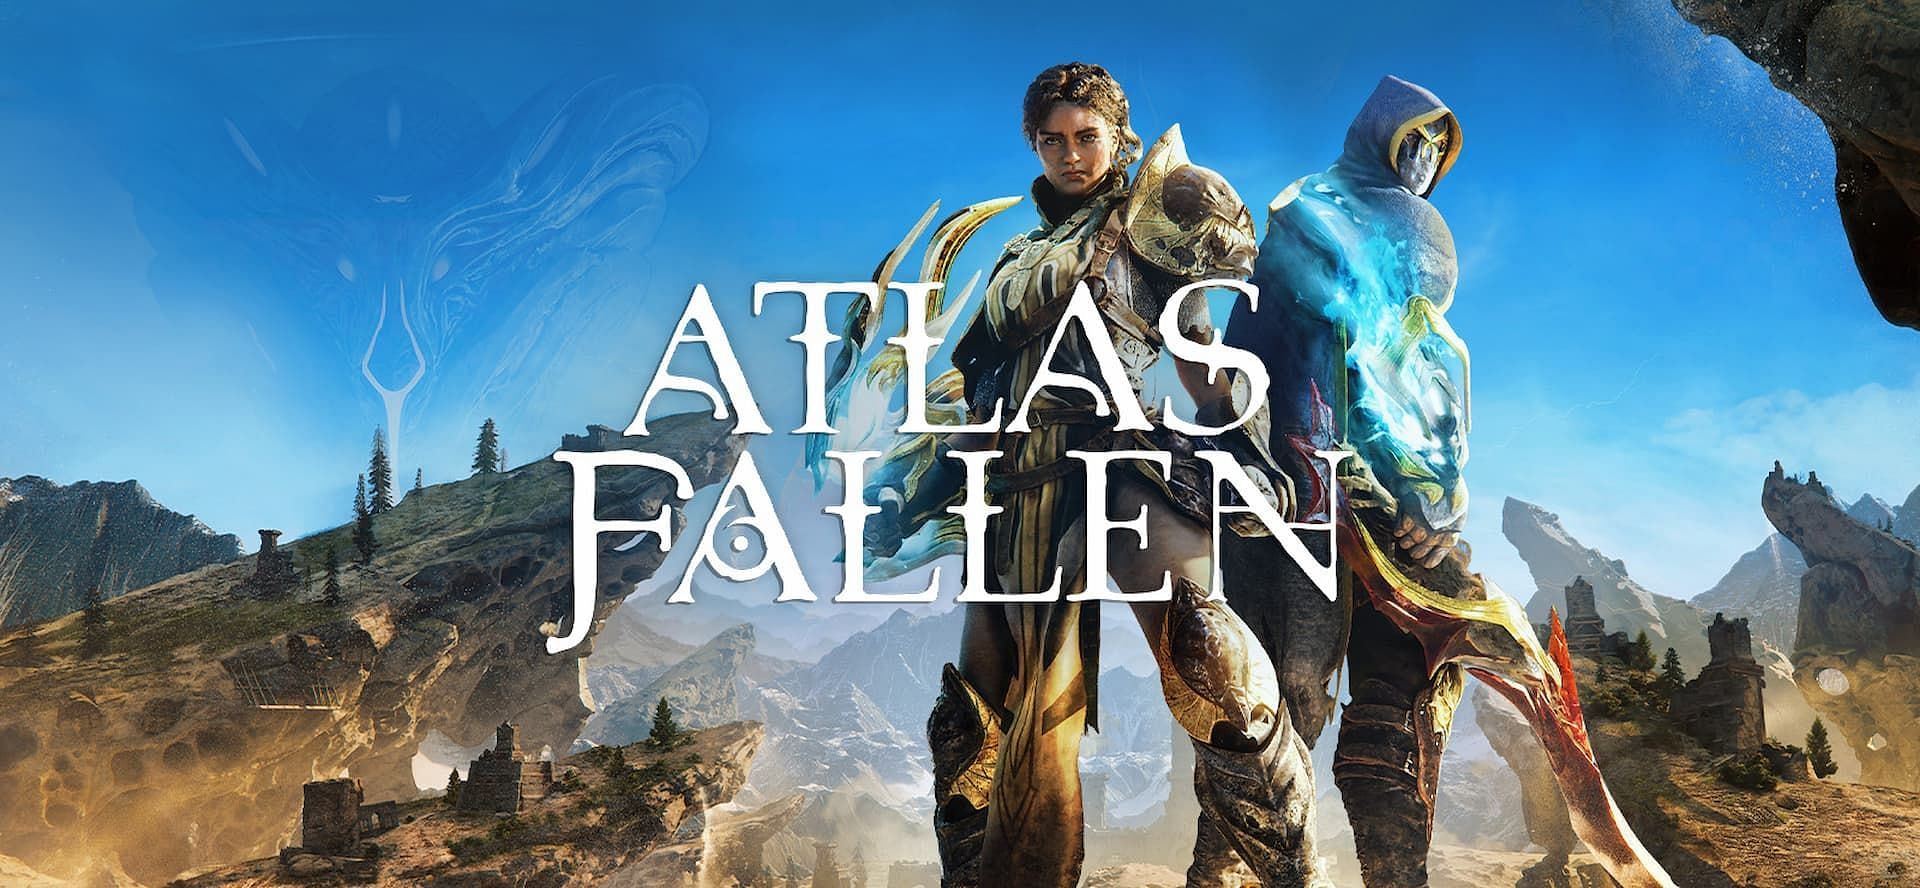 Atlas Fallen is a role playing game that can be played in Co-op (Image via Focus Entertainment)